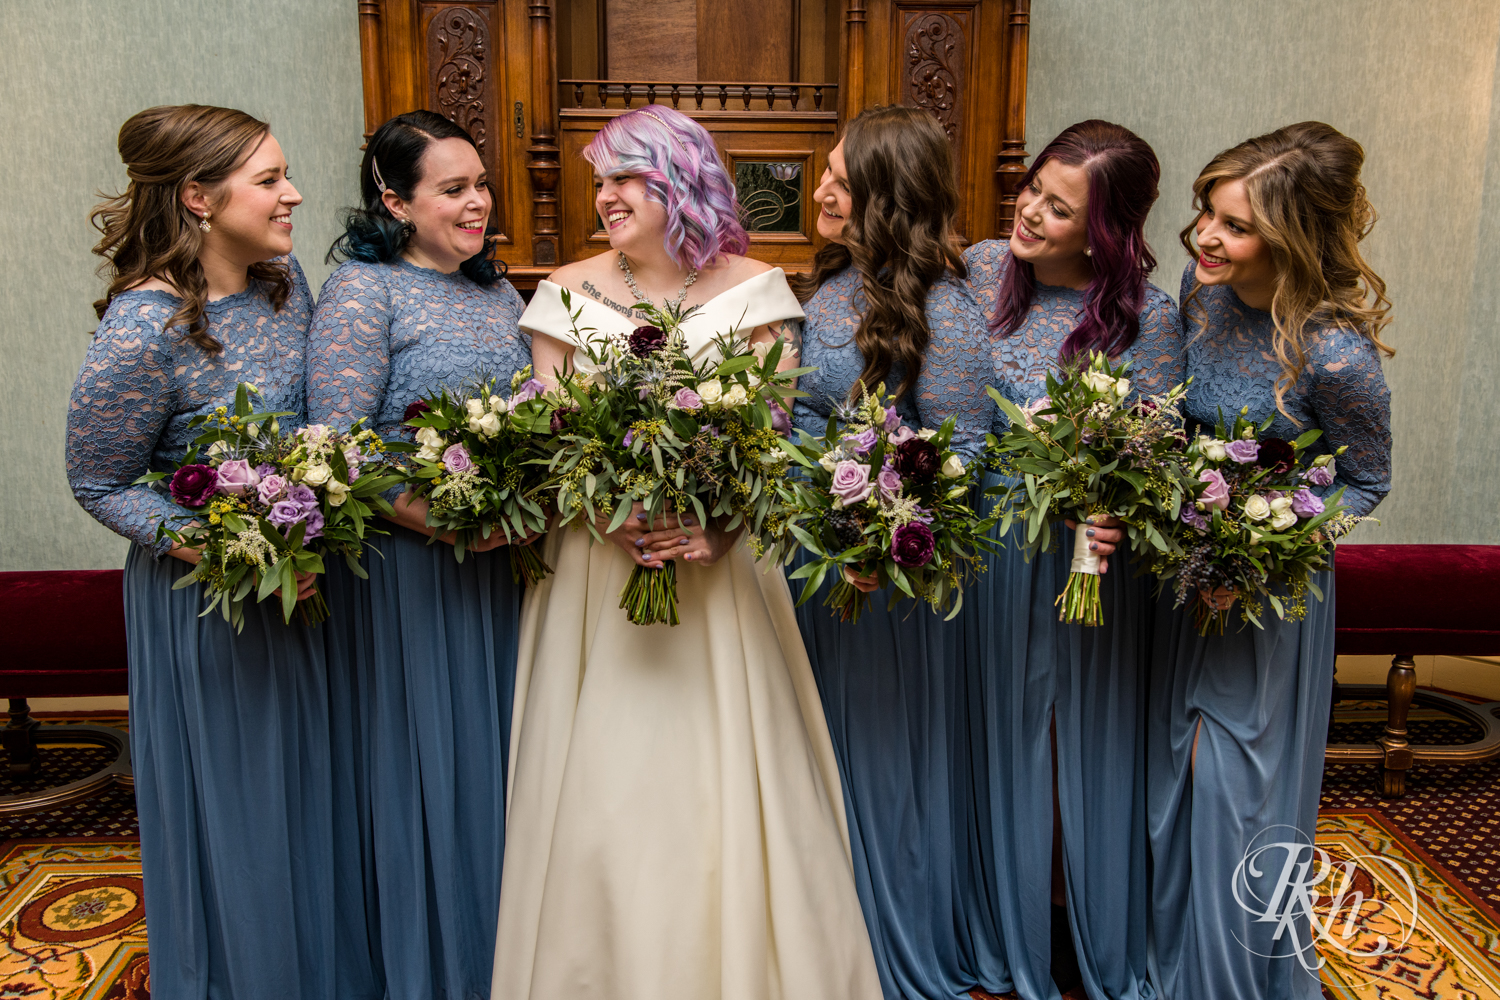 Wedding party in long sleeve blue dressess smile at the Saint Paul Hotel in Saint Paul, Minnesota.